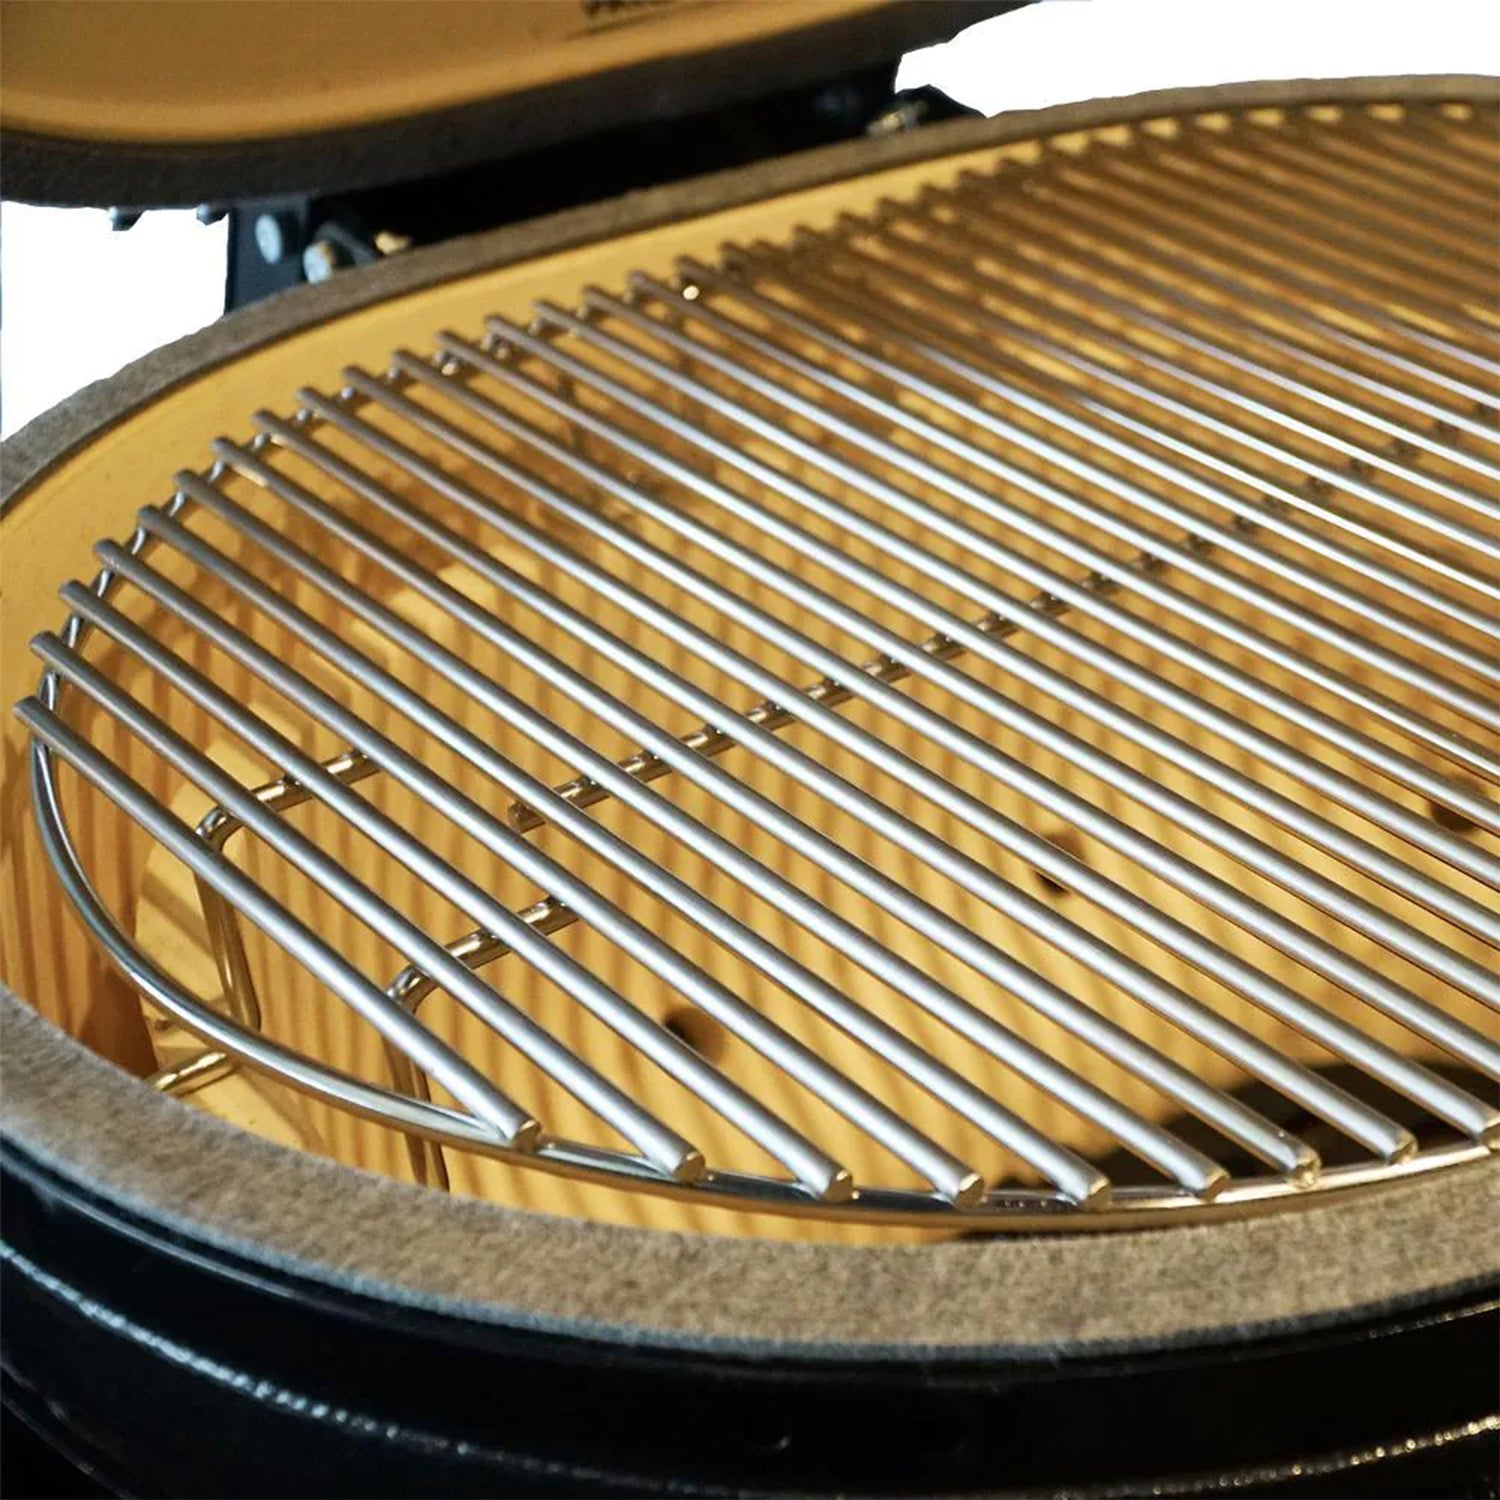 PRIMO Oval Large 300 Ceramic Kamado BBQ Grill W/ Stainless Steel Grates - PGCLGH (95414871)